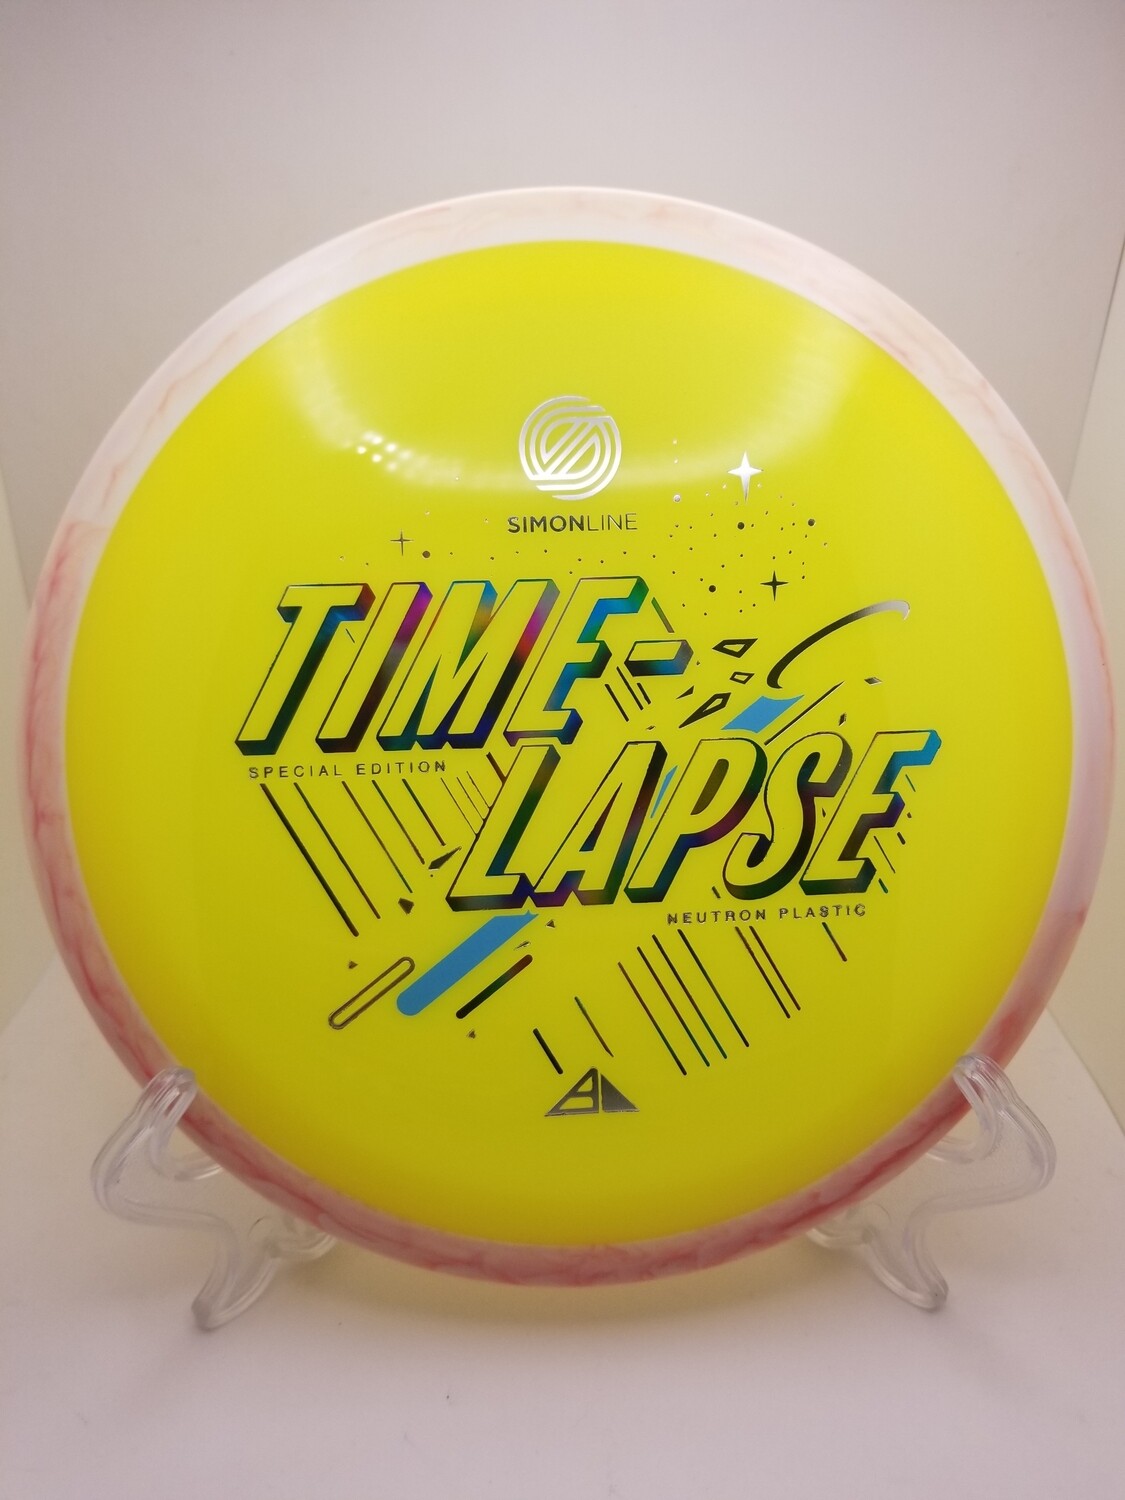 Axiom Discs Special Edition Time Lapse Dayglow Yellow and Swirly Pink Rim Neutron 172g. Simon Line